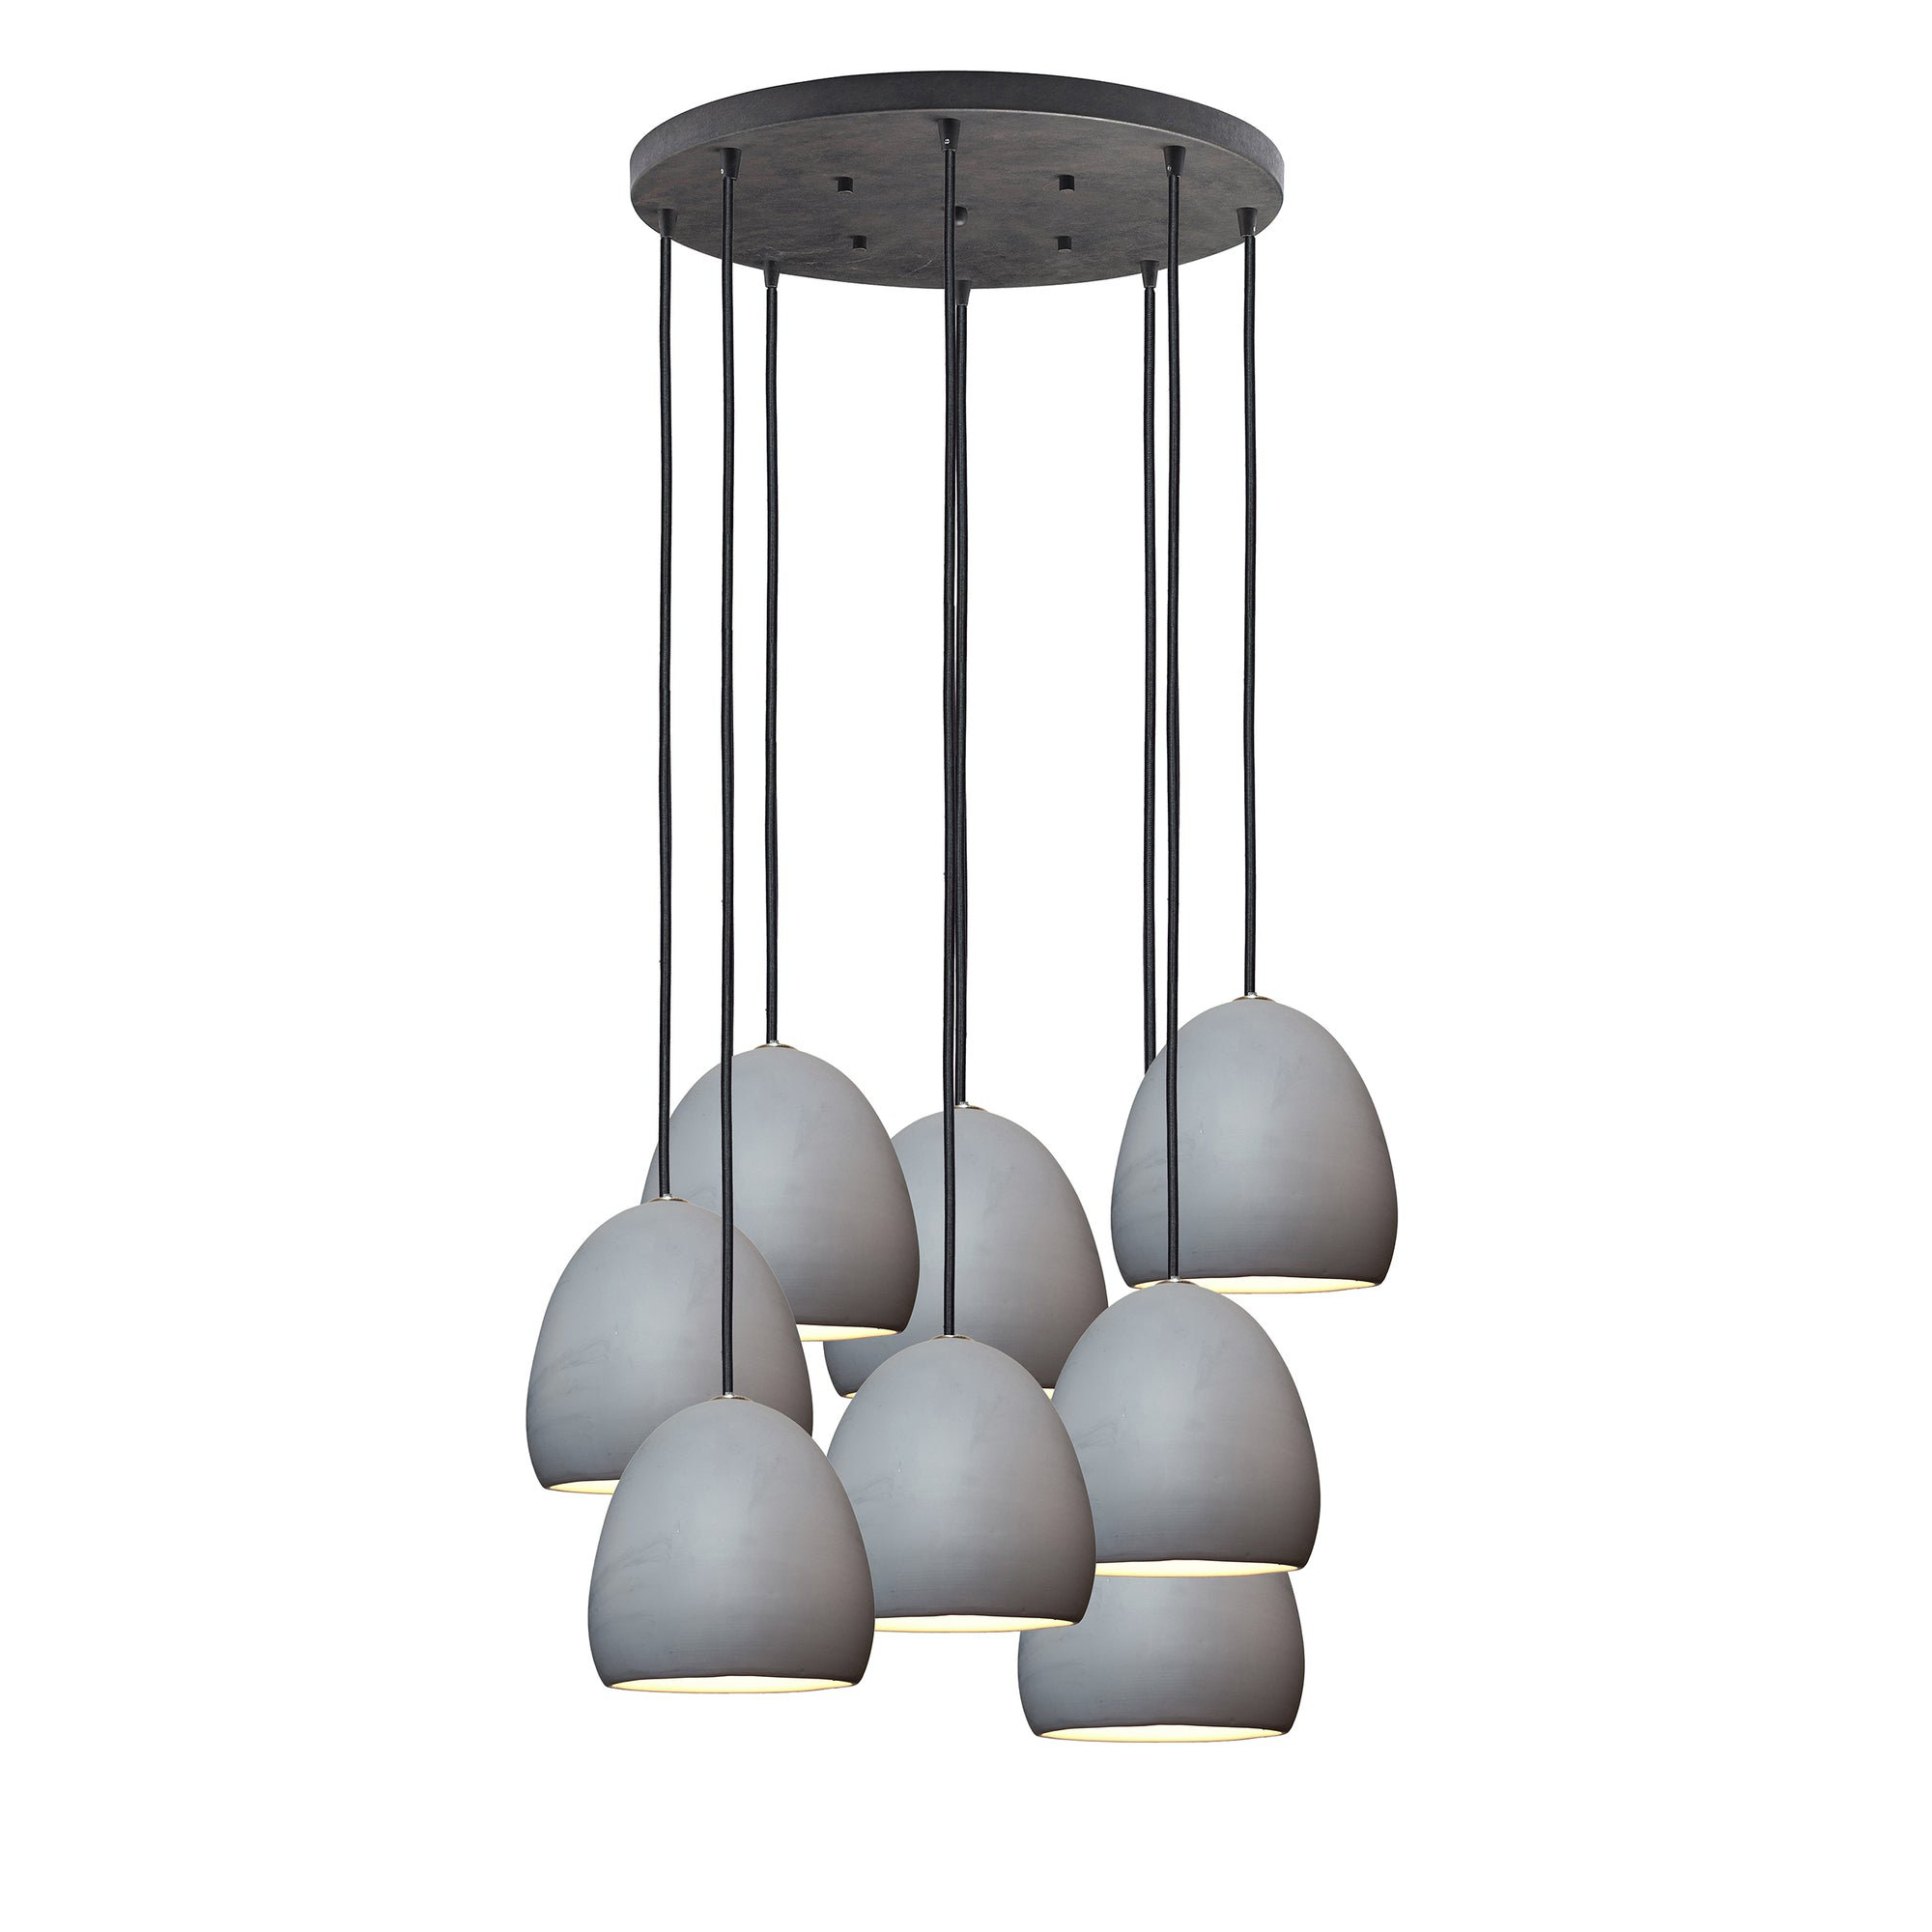 Hammers and Heels 5 Matte White Porcelain Dome Pendant Light - White Cord  - Wayfair Canada